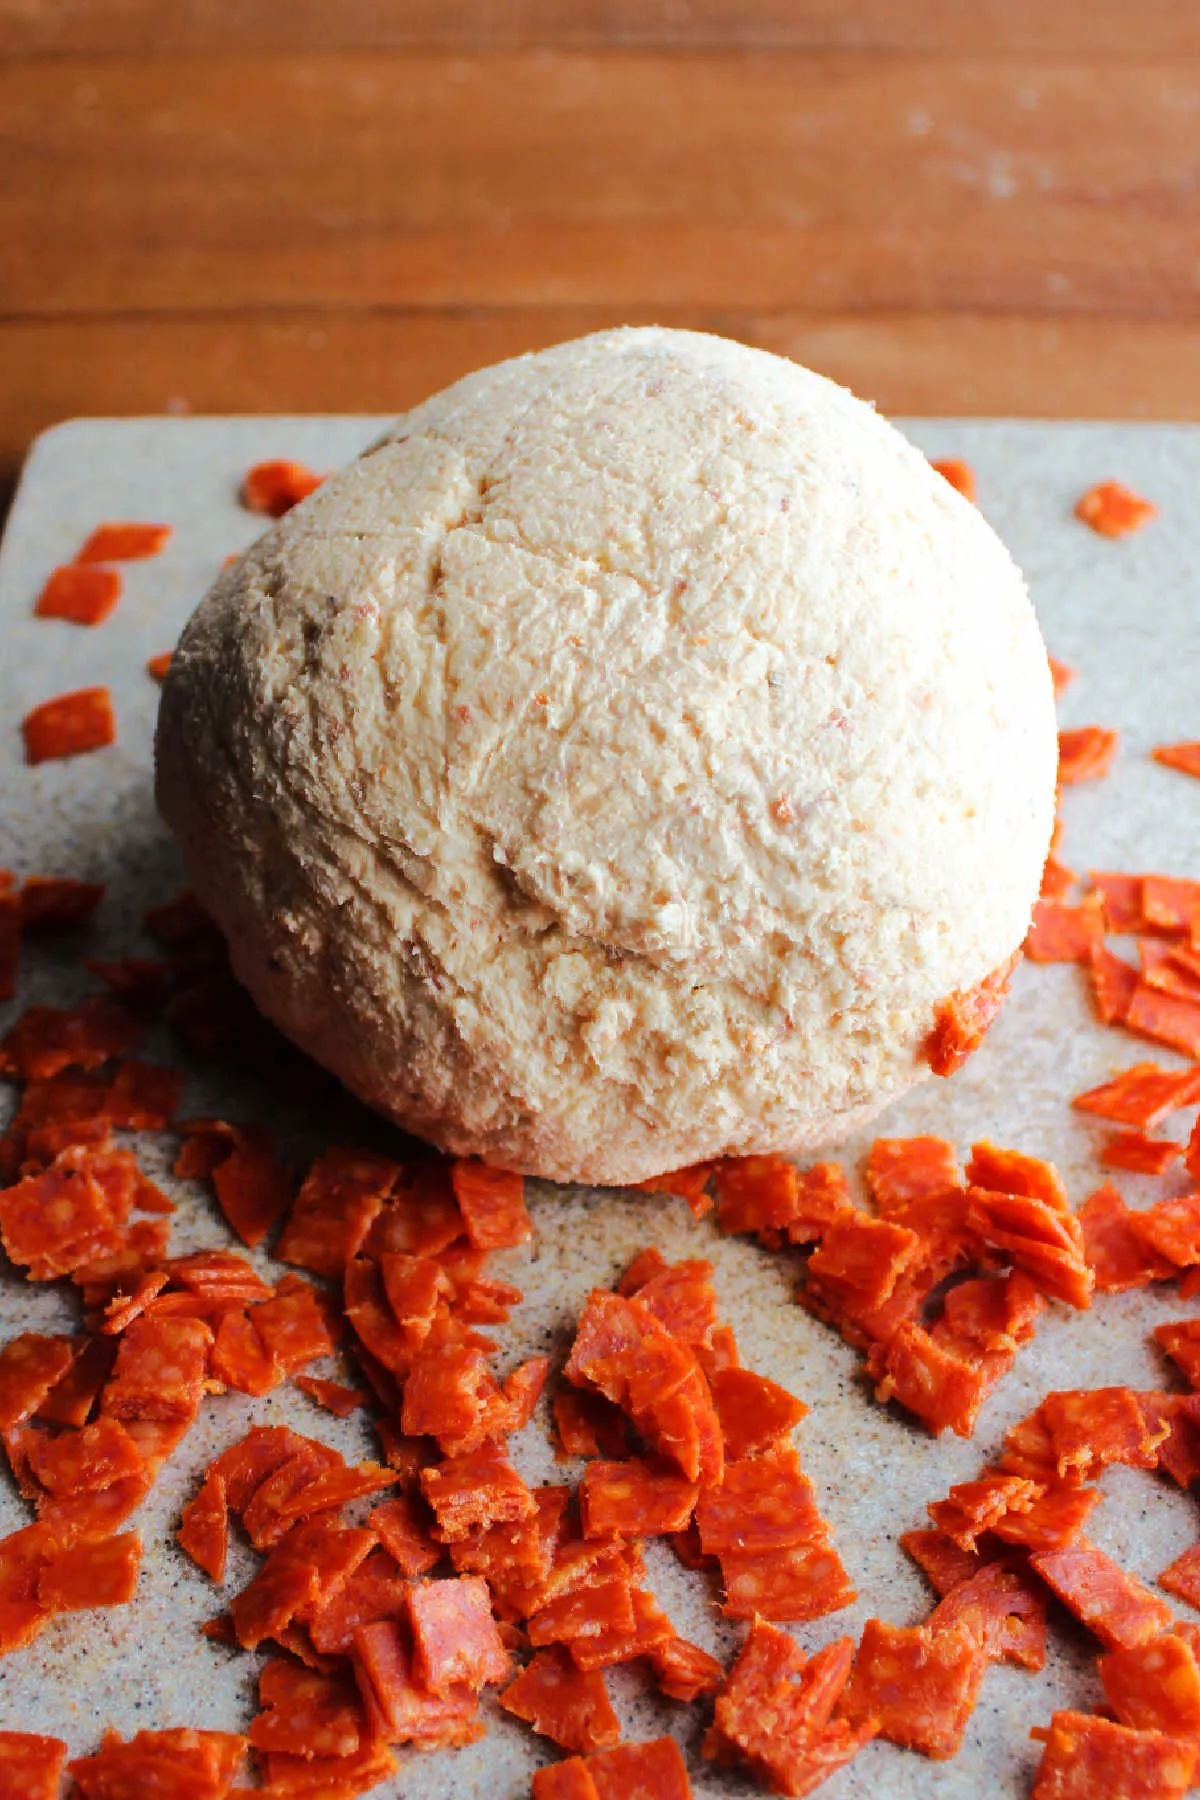 Rolling cheese ball around in pieces of pepperoni.